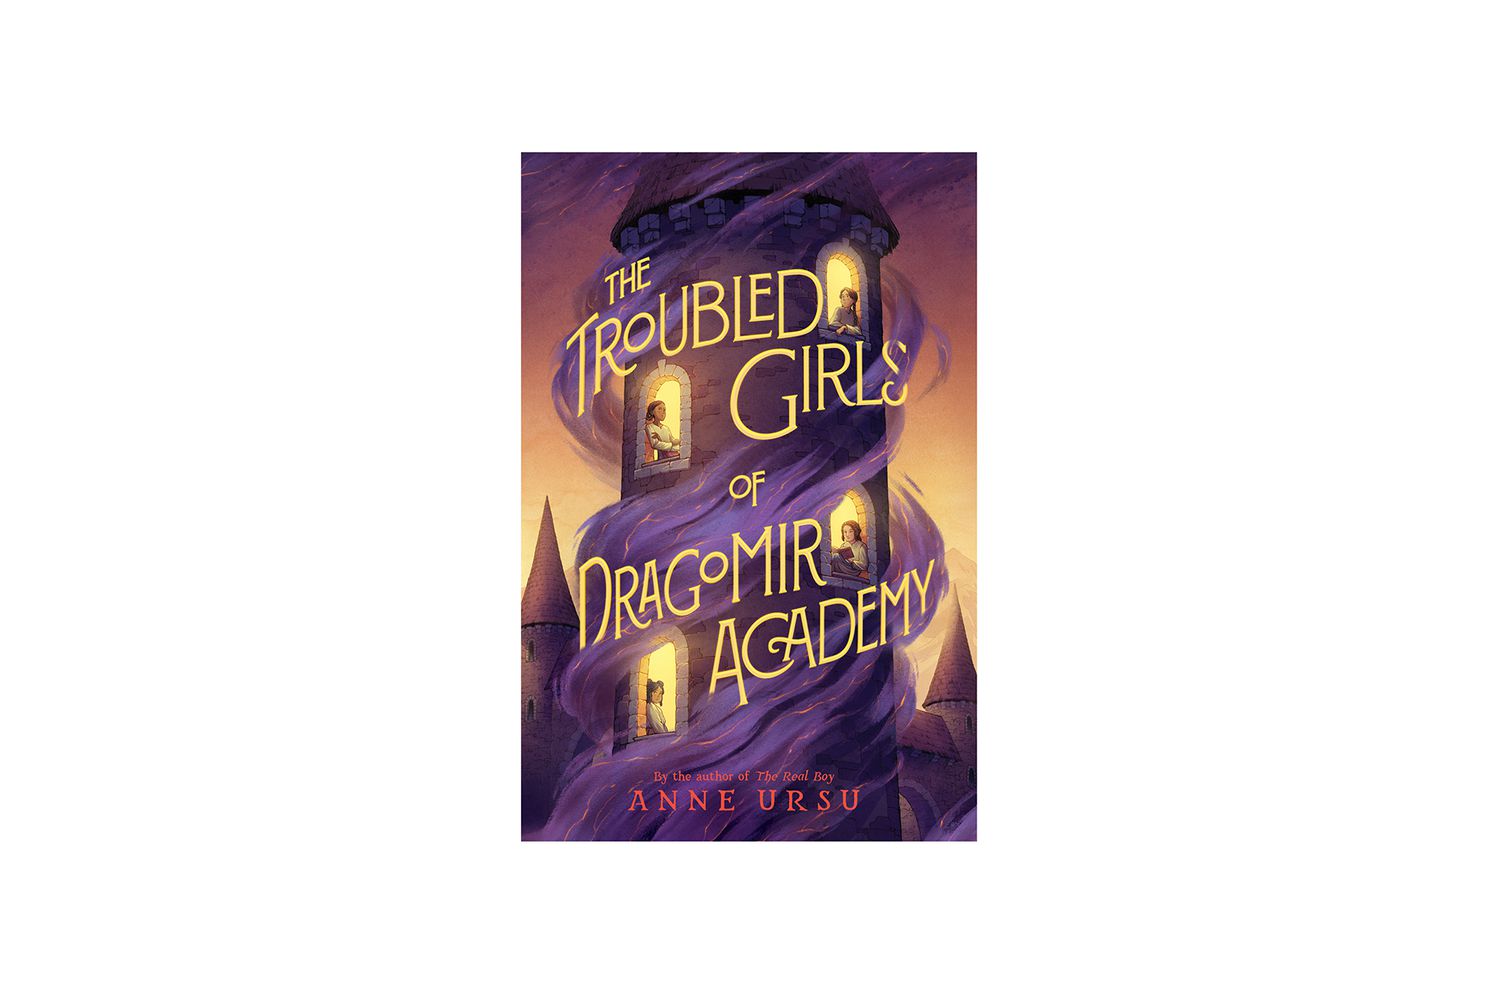 The Troubled Girls of Dragomir Academy book